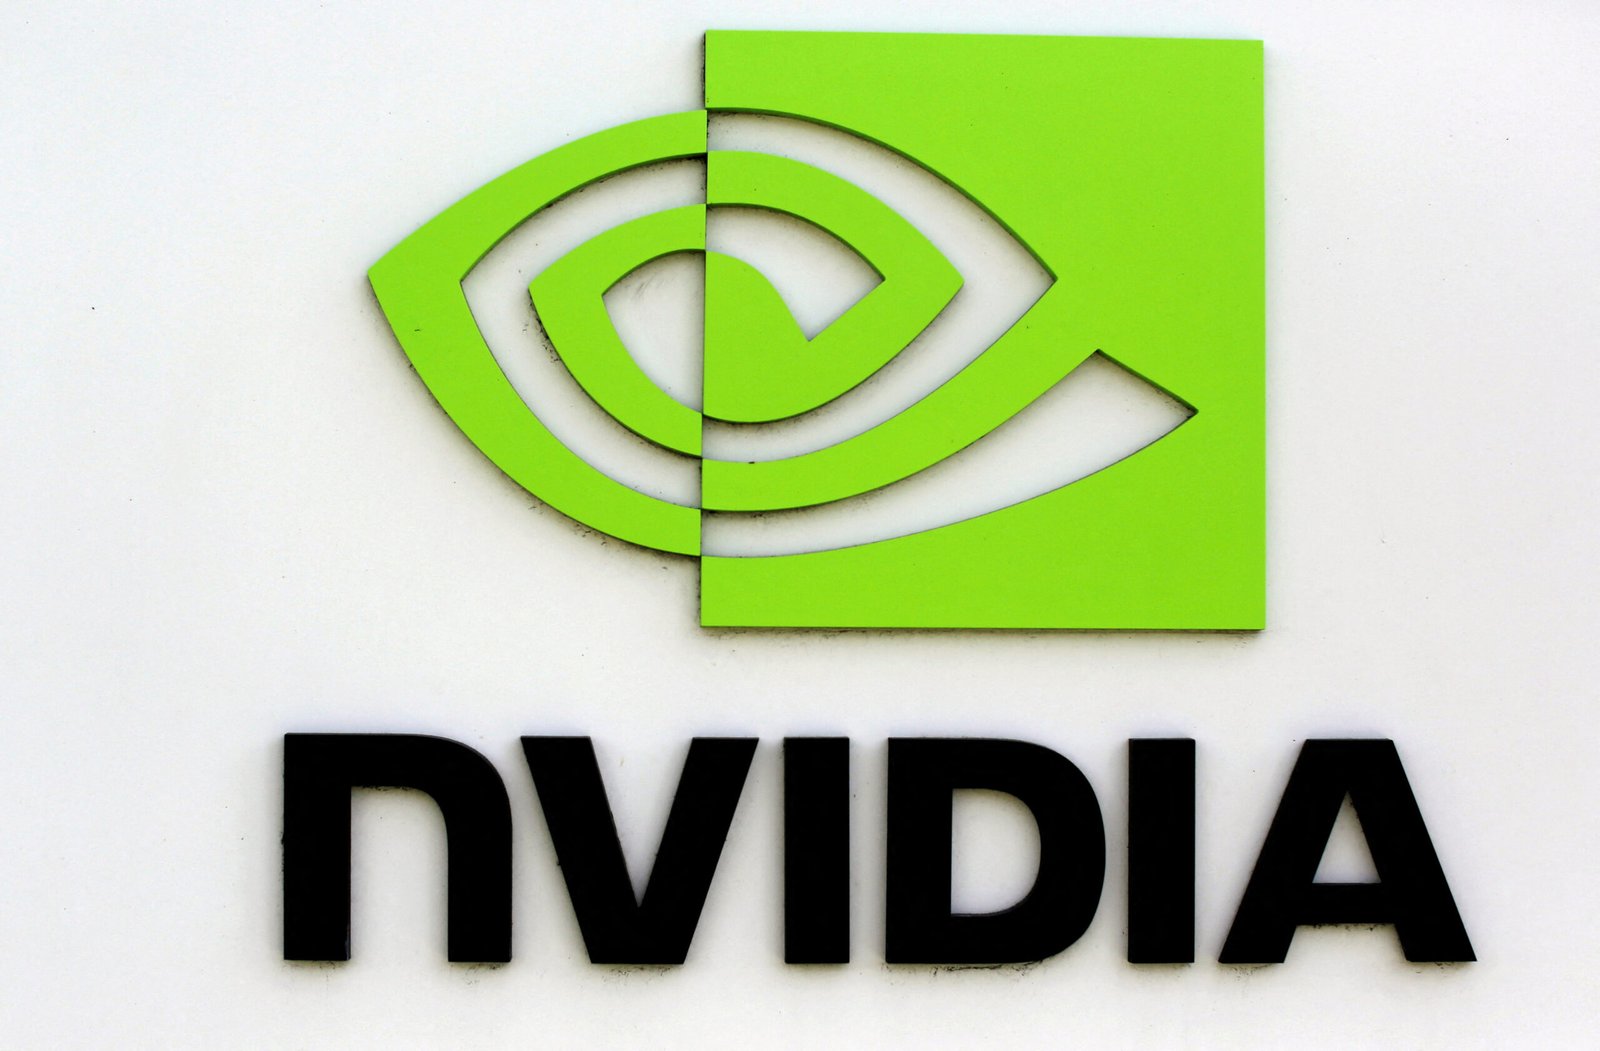 Nvidia Joins OpenAI in Facing Copyright Lawsuits Over AI Training Practices